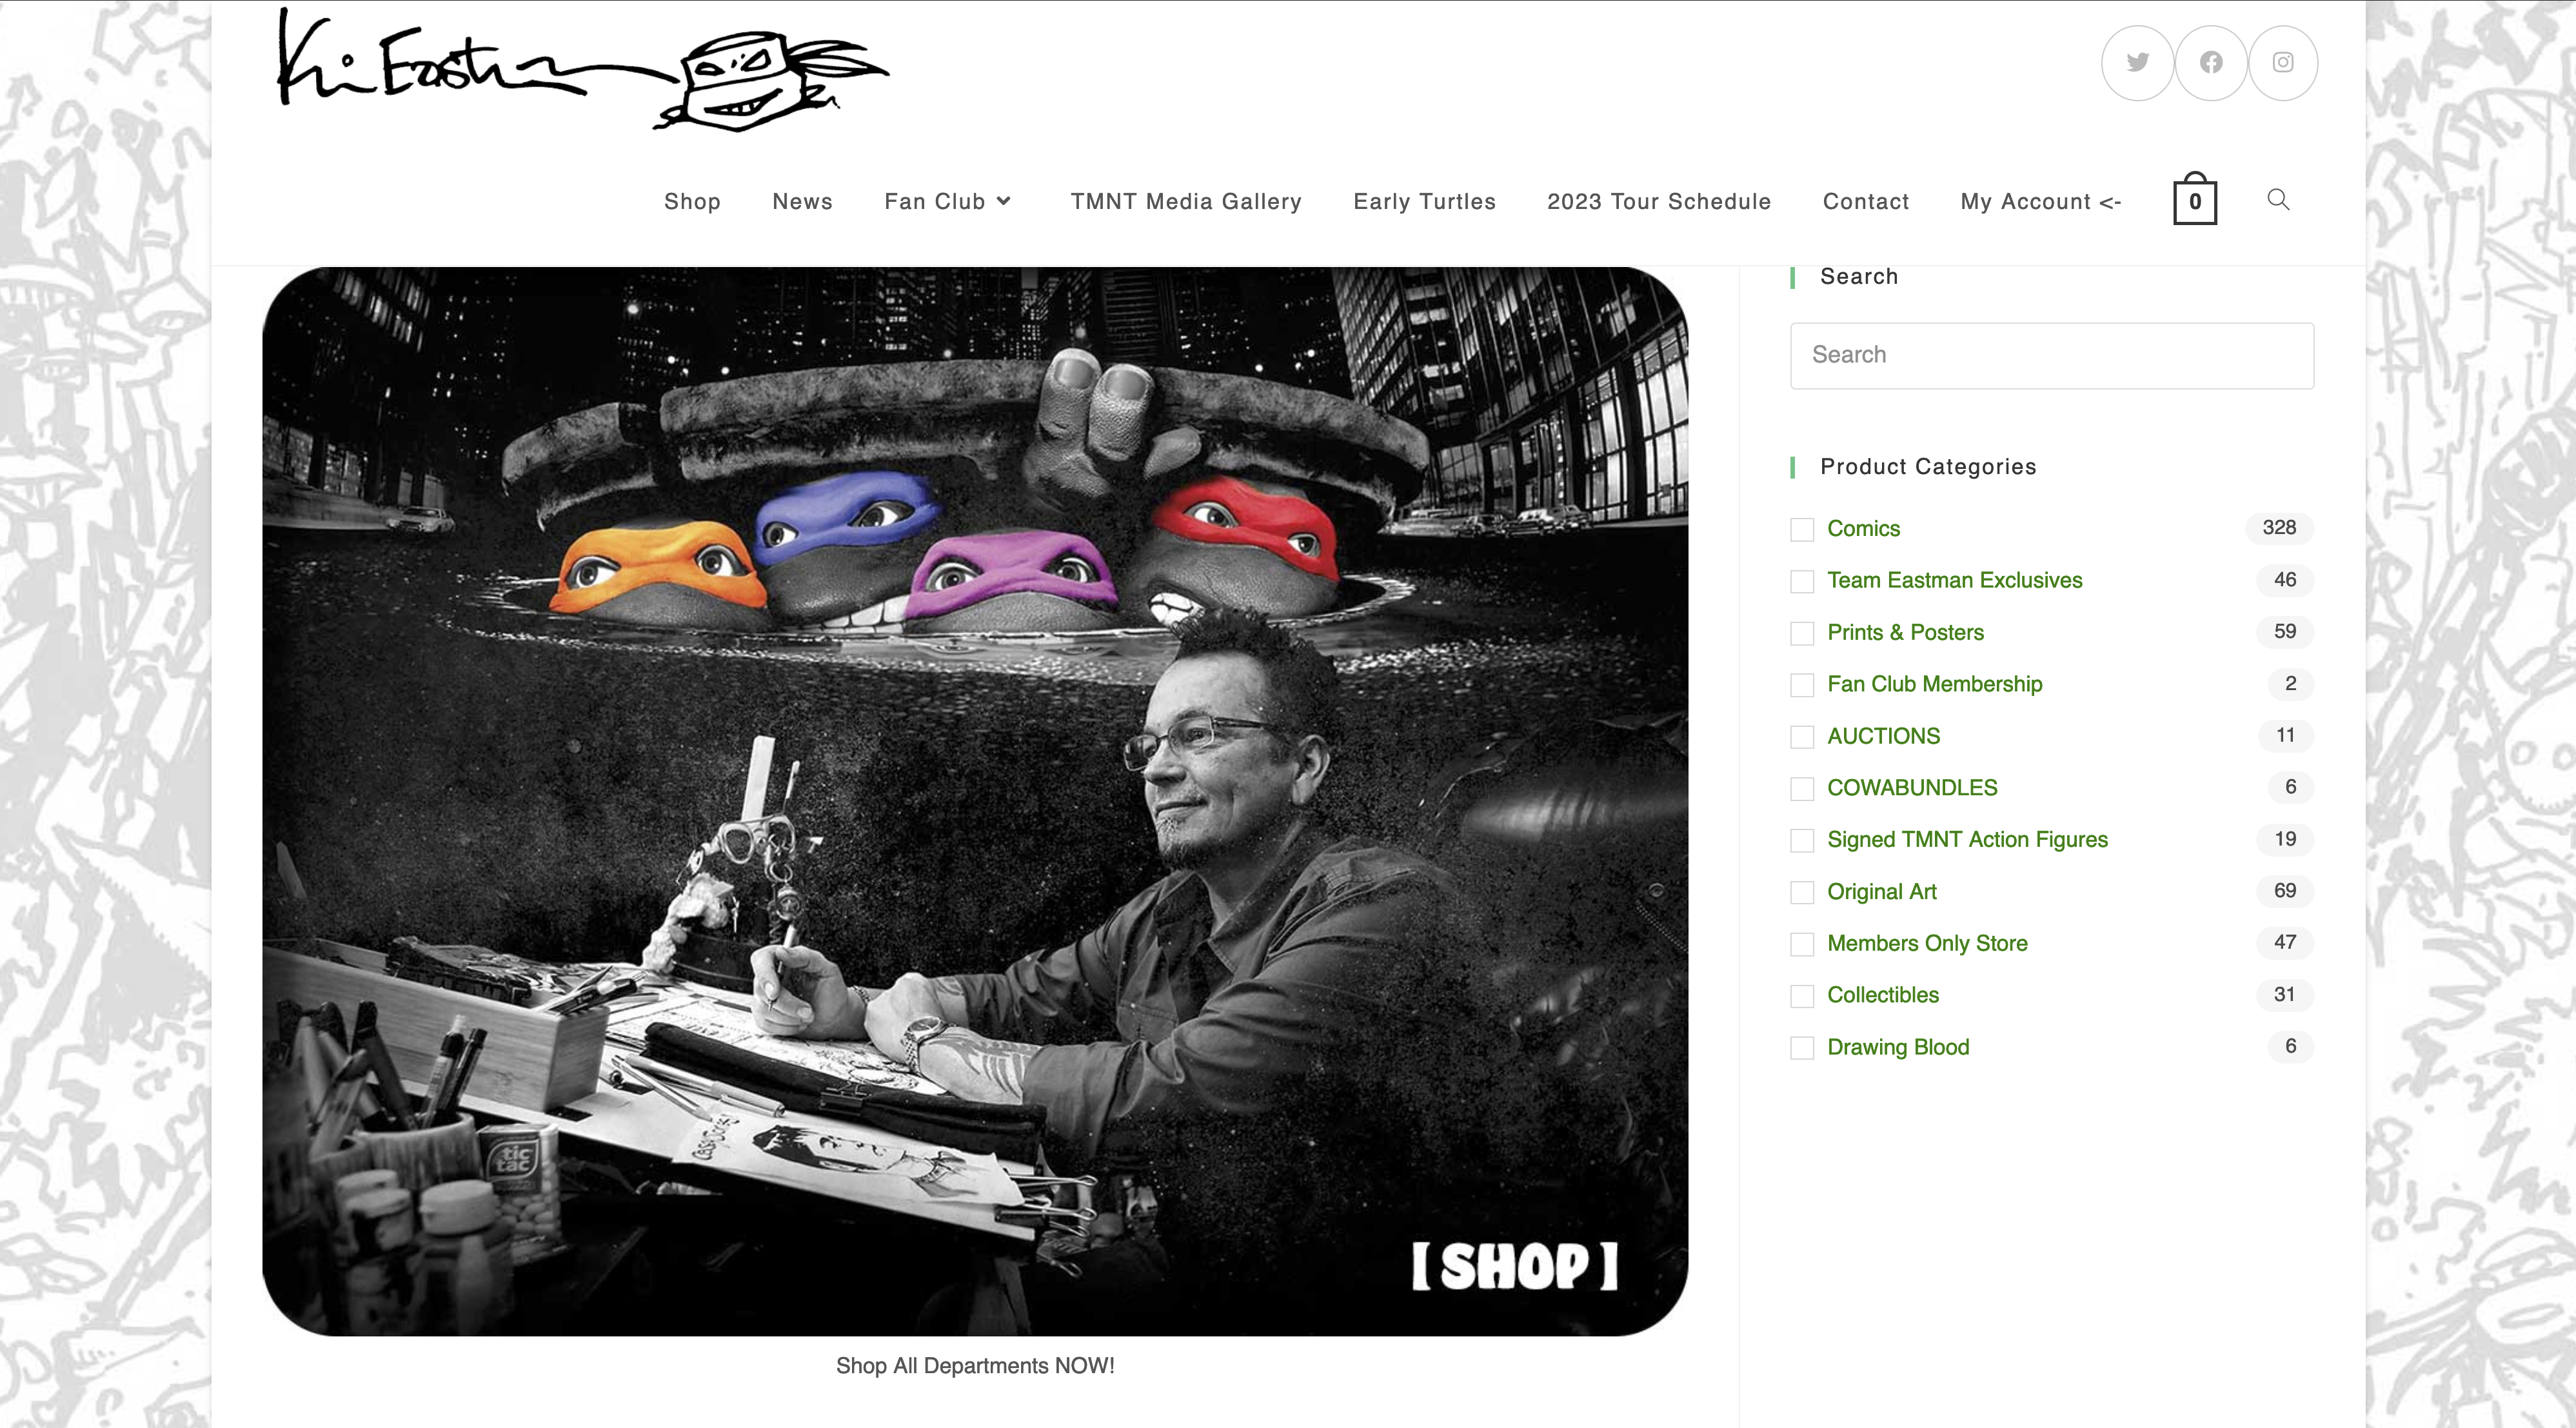 Our website is revised, responsive and relaunched!!!